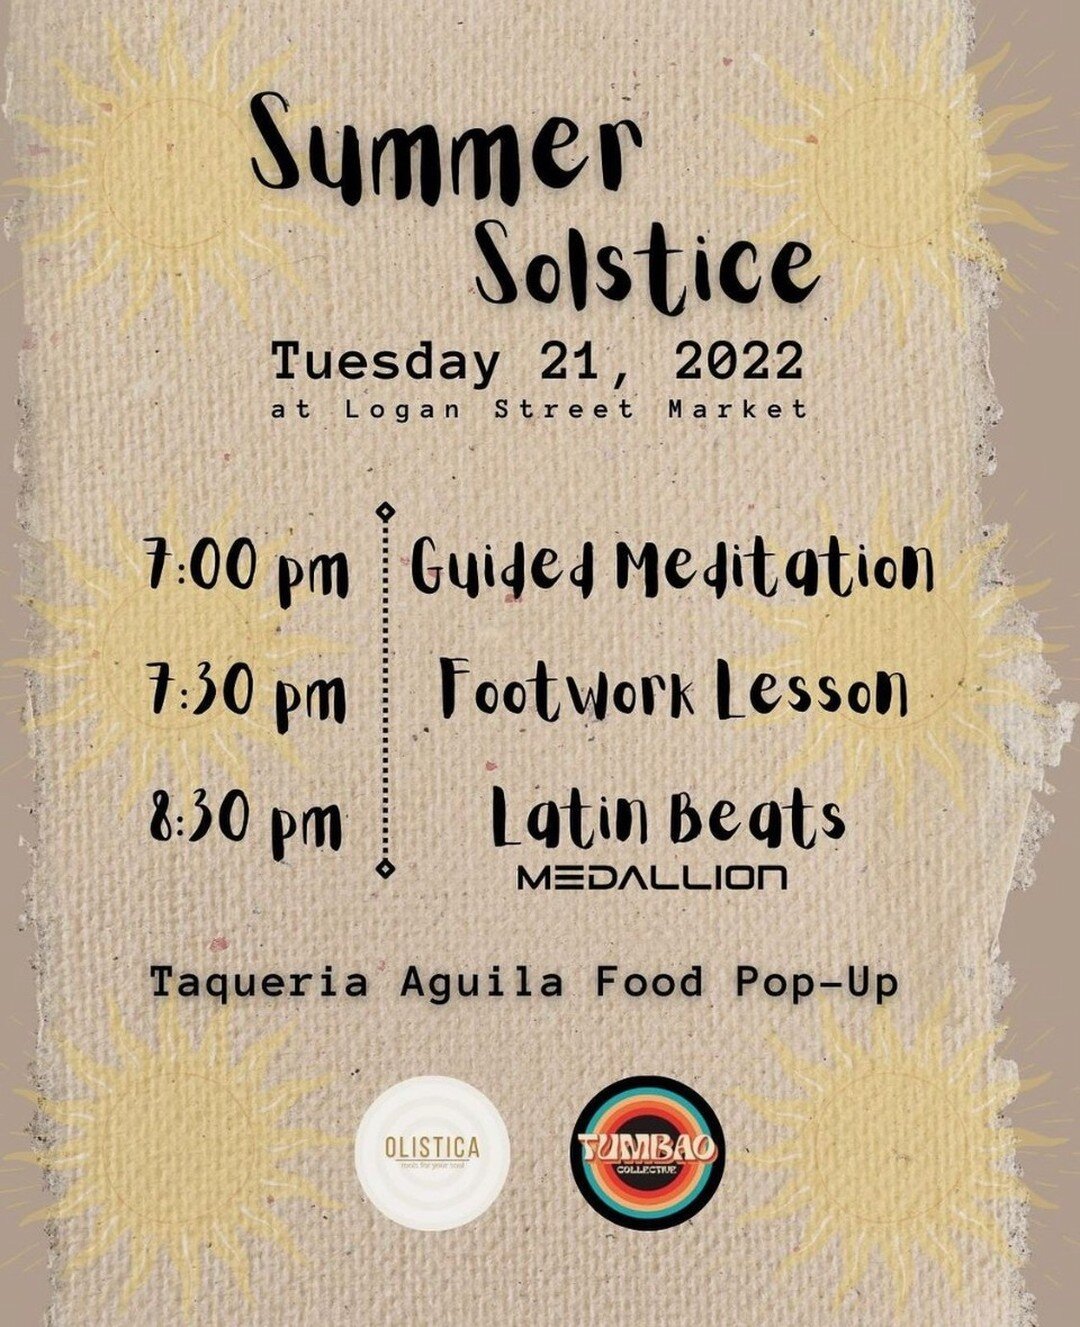 TONIGHT! Come celebrate the Summer Solstice with @tumbaocollective  @o.listica  @djmedallion and @taqueria.aguila! 🌞✨ 

Come early and make time to shop around with our amazing vendors!

======
#Louisville #LouisvilleEvents #VisitLouisville #SummerS